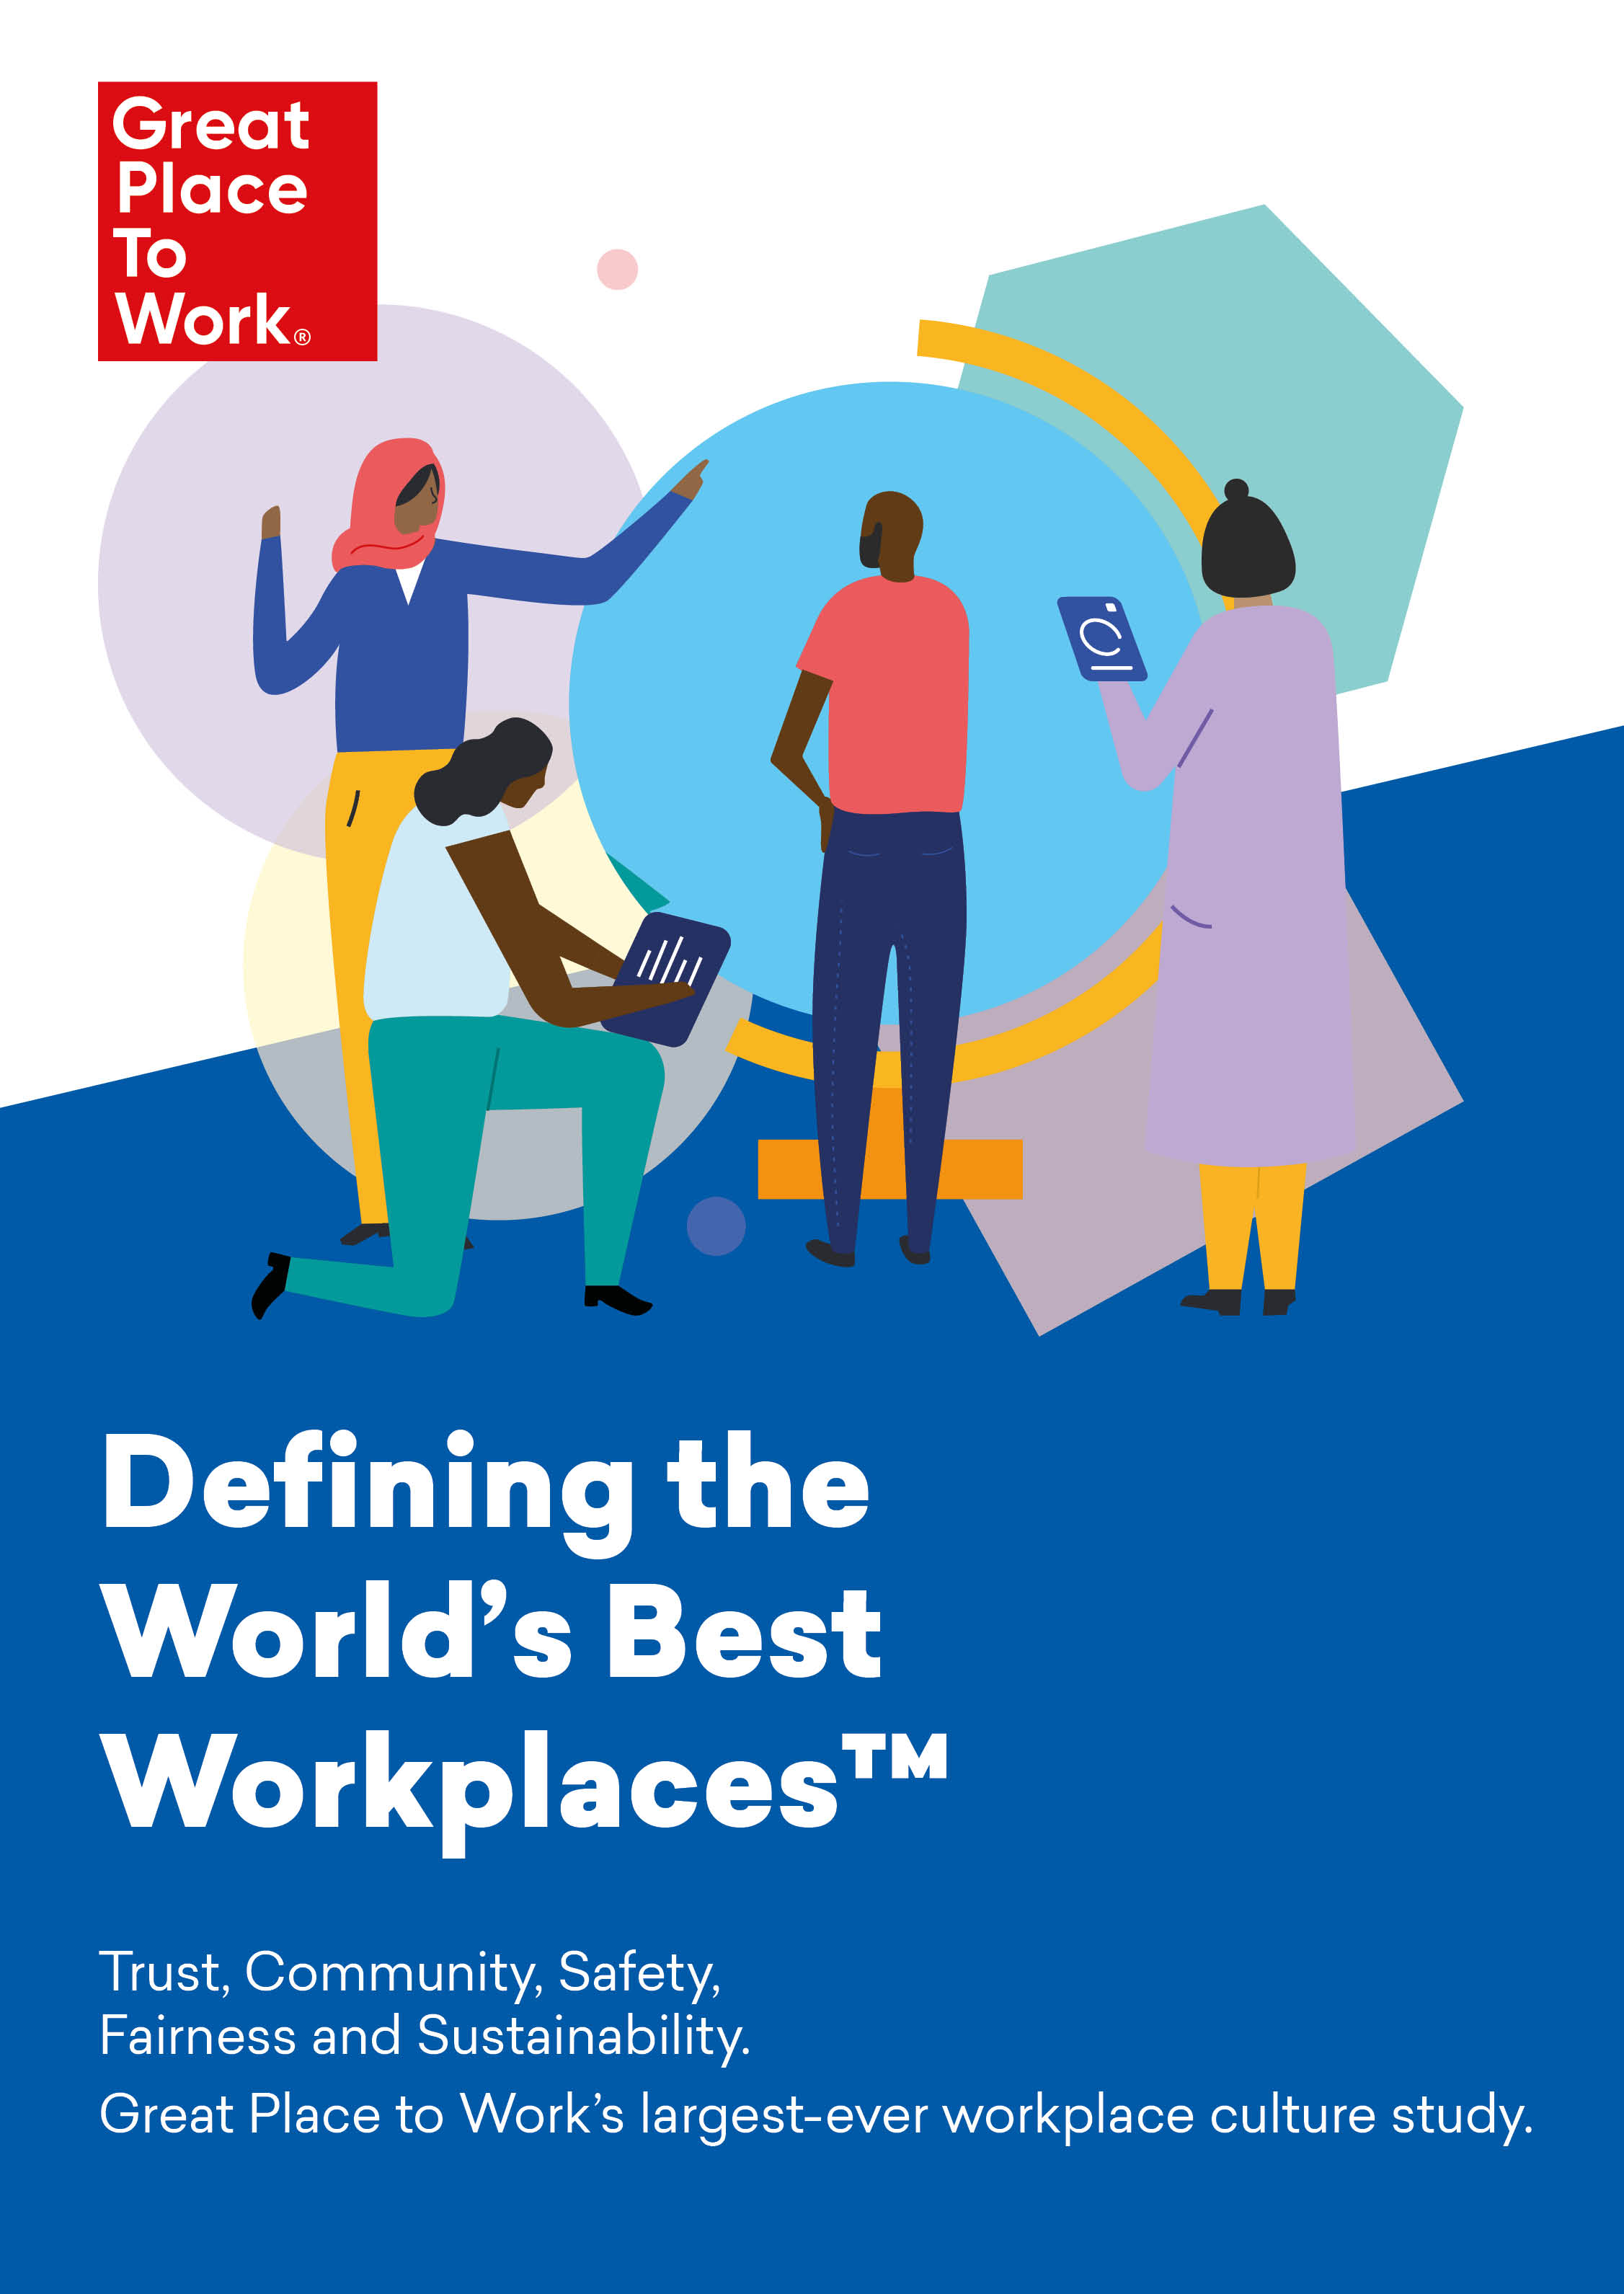 Defining the World's Best Workplaces | Great Place To Work - English